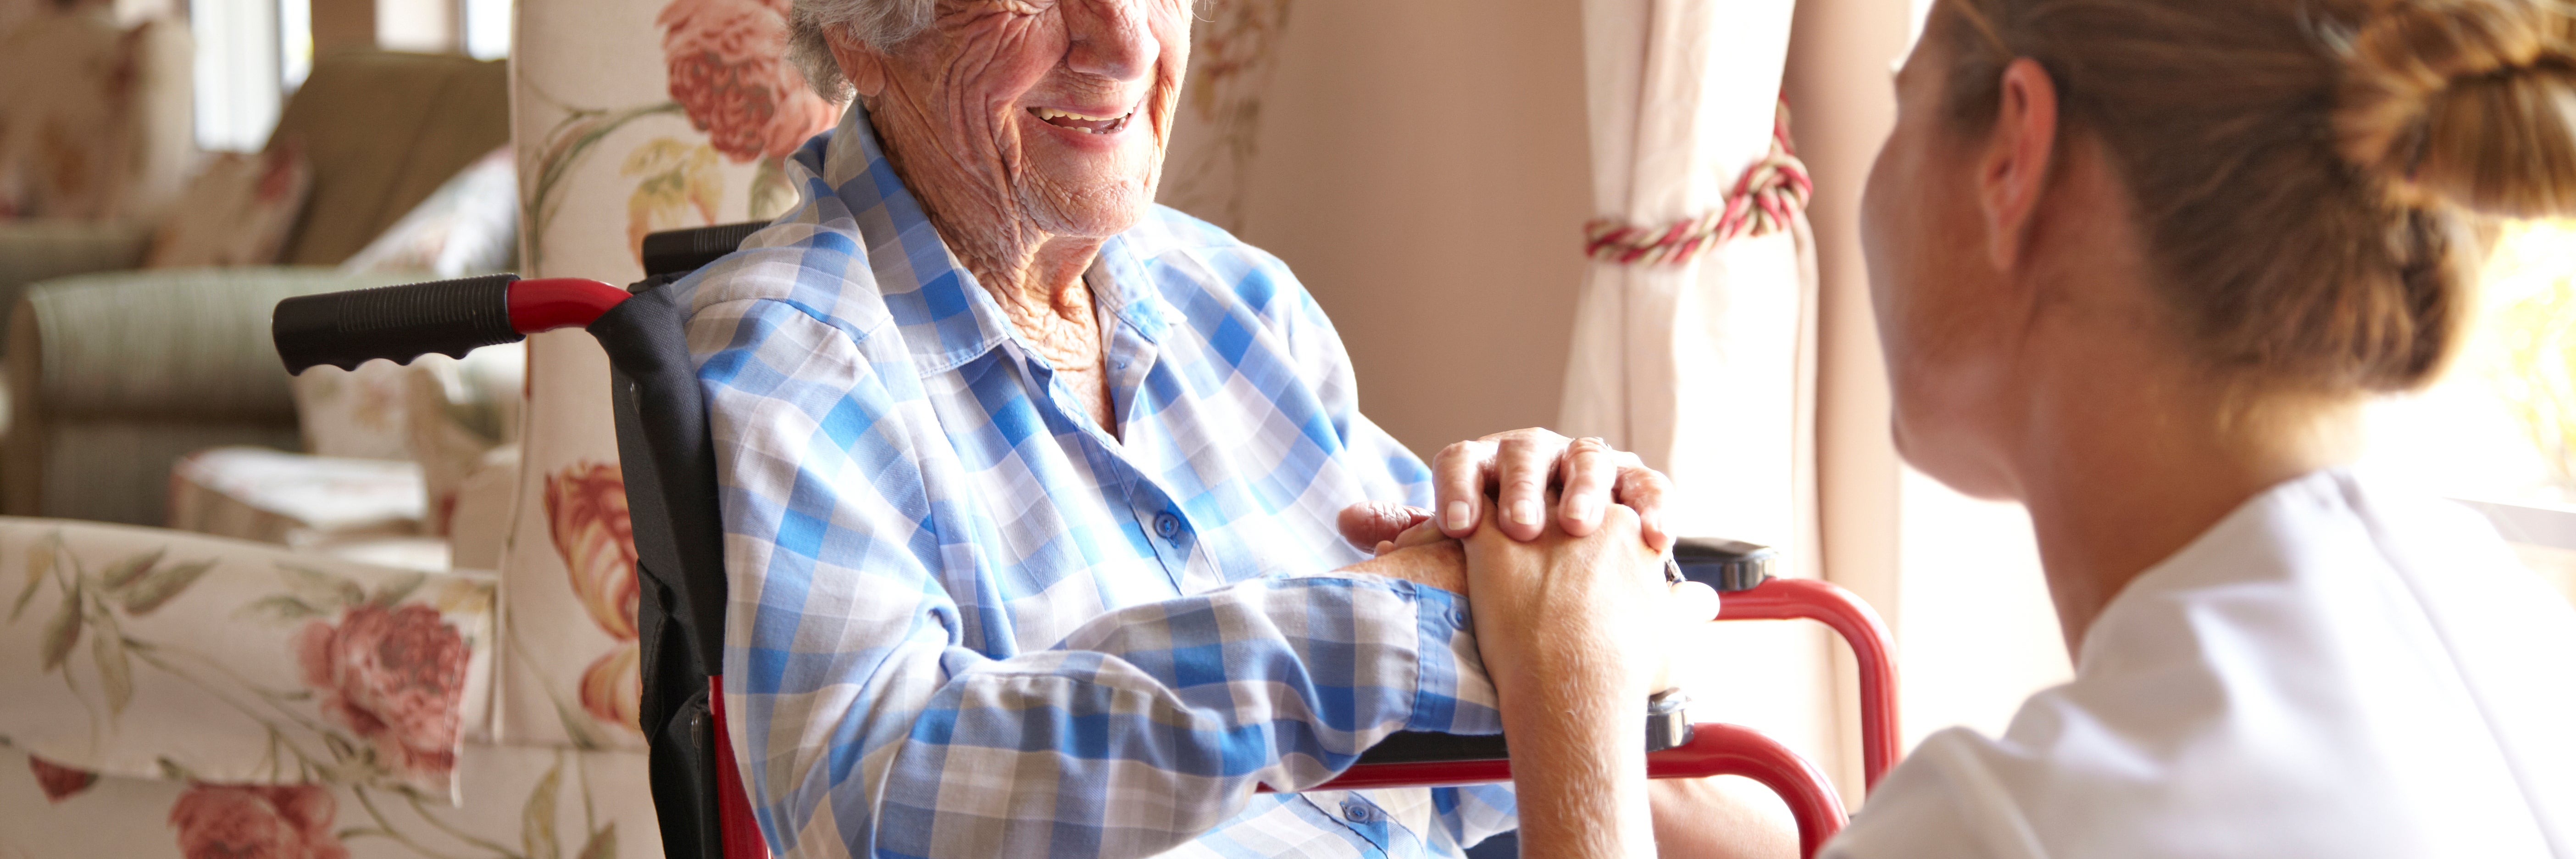 Inspection frequencies: Social care homes